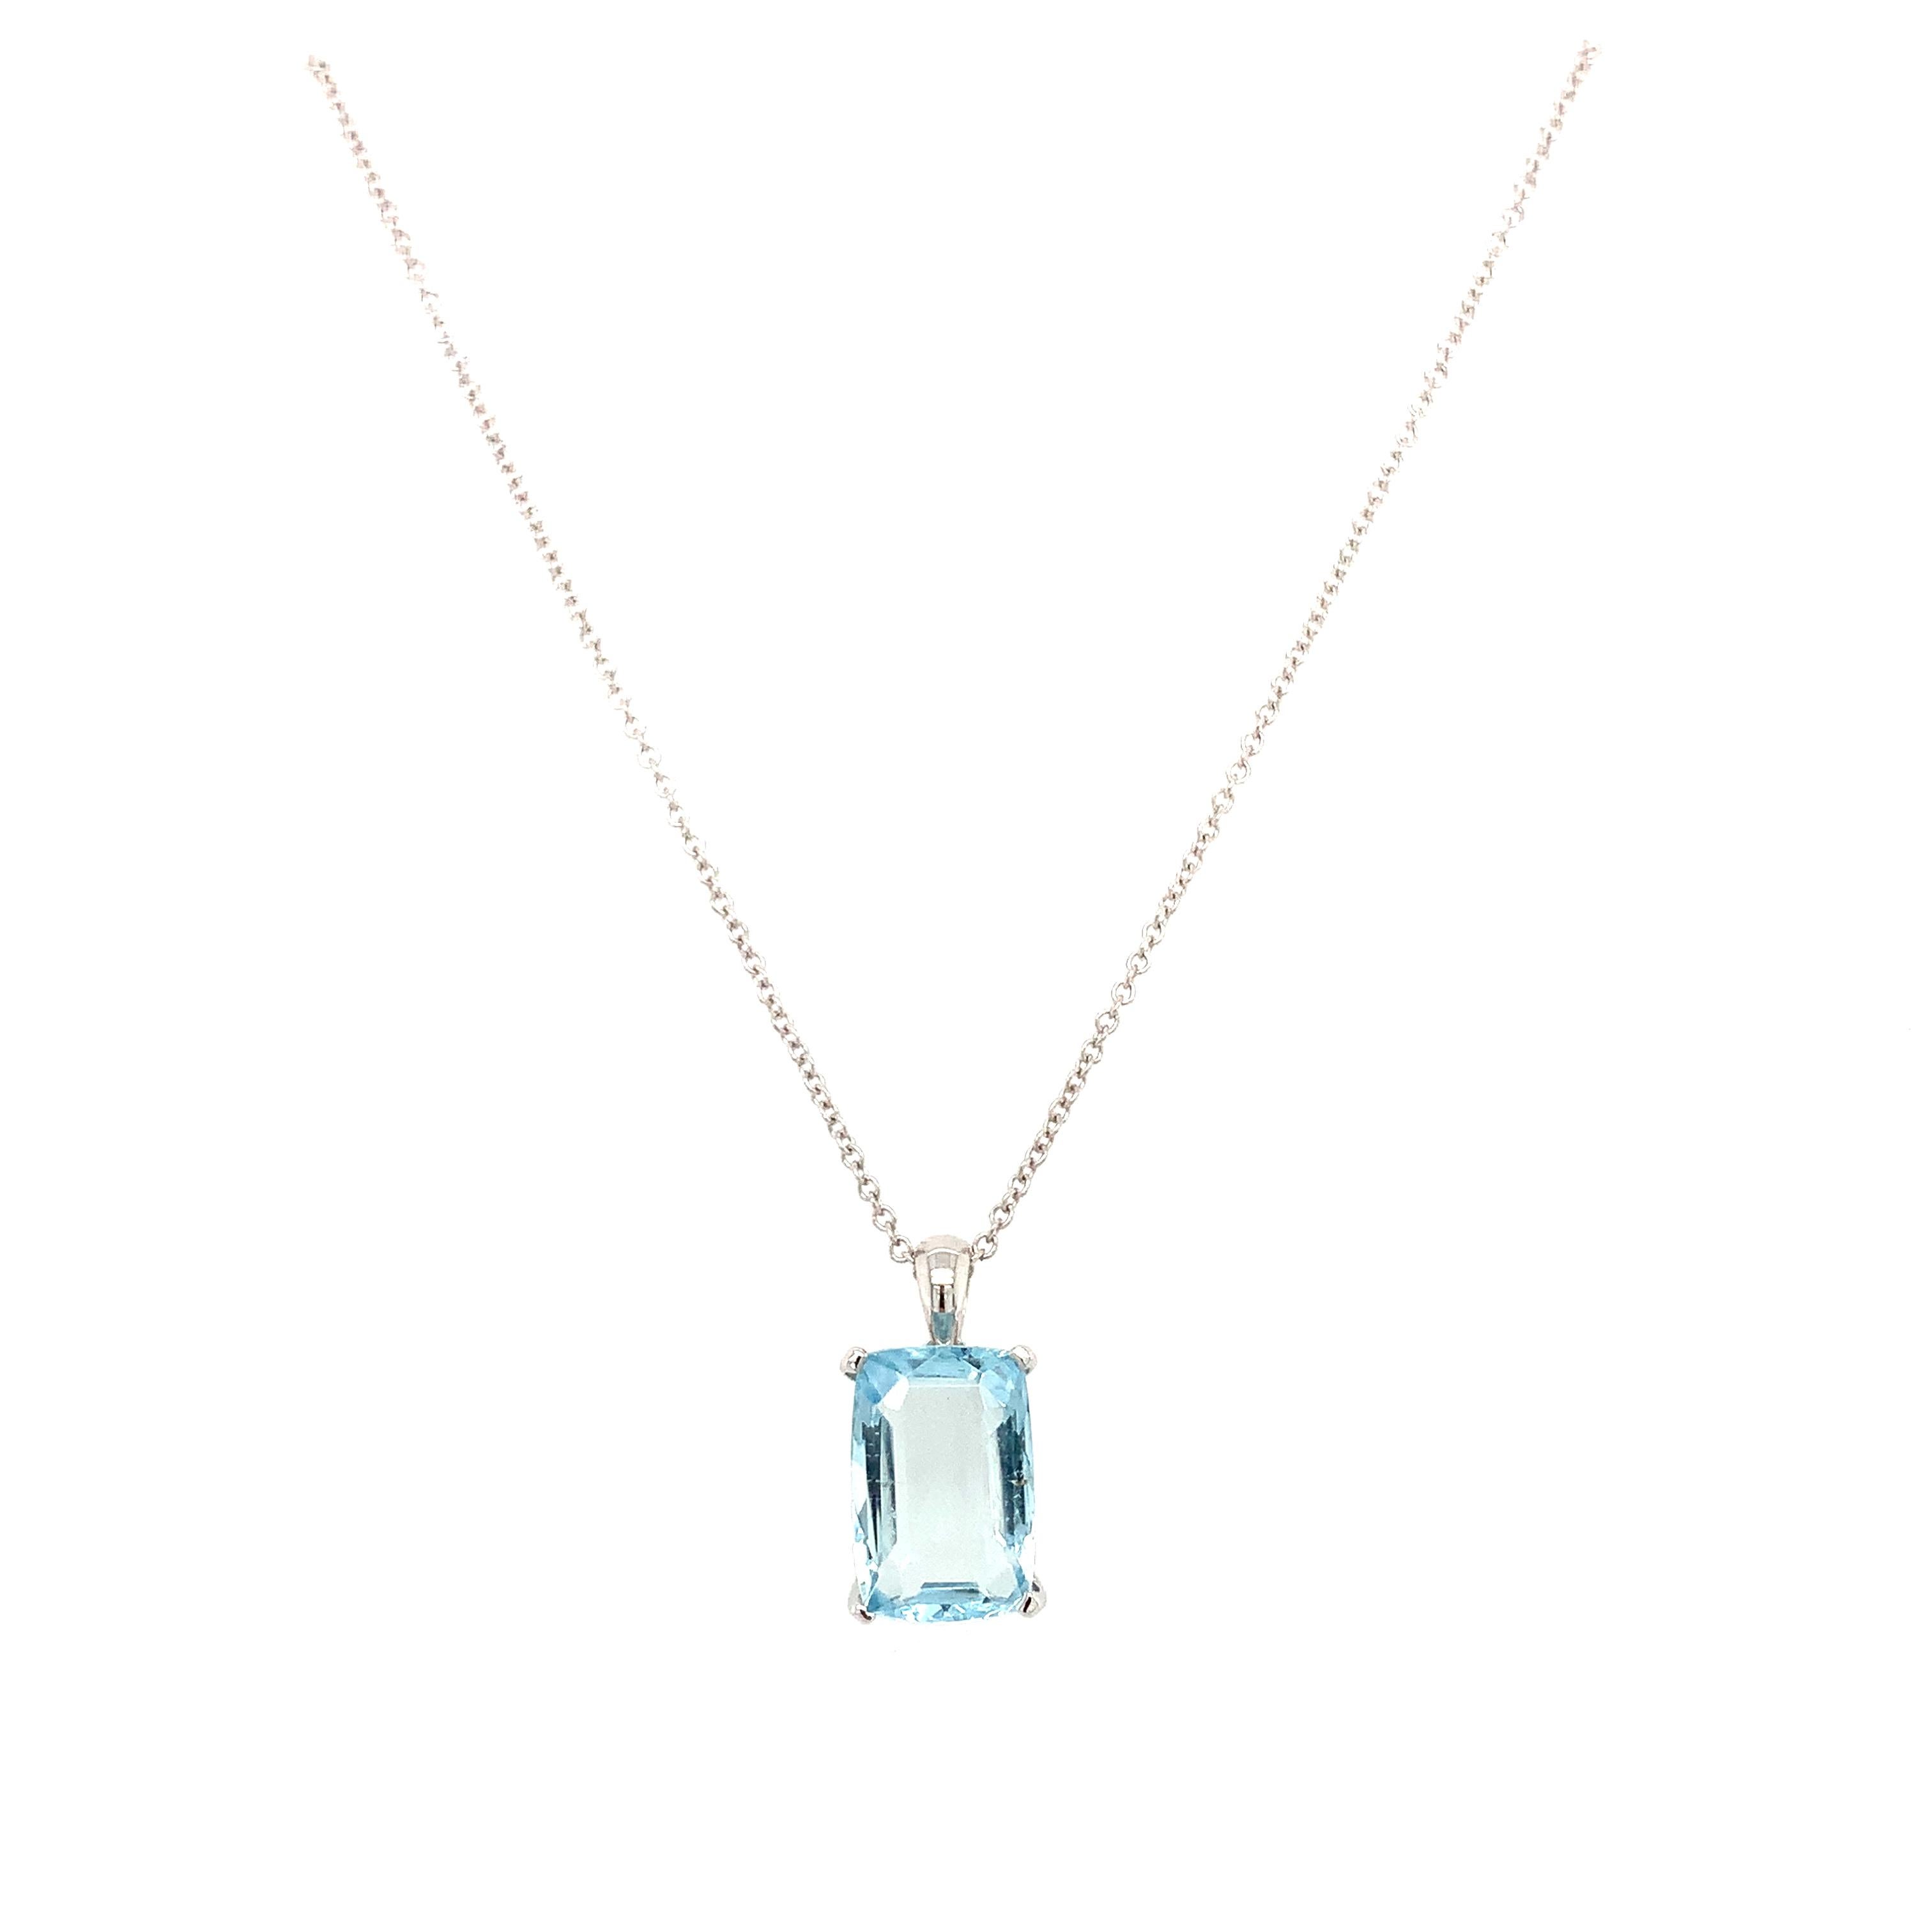 Aquamarine emerald cut solitaire pendant necklace 18k white gold In New Condition For Sale In London, GB